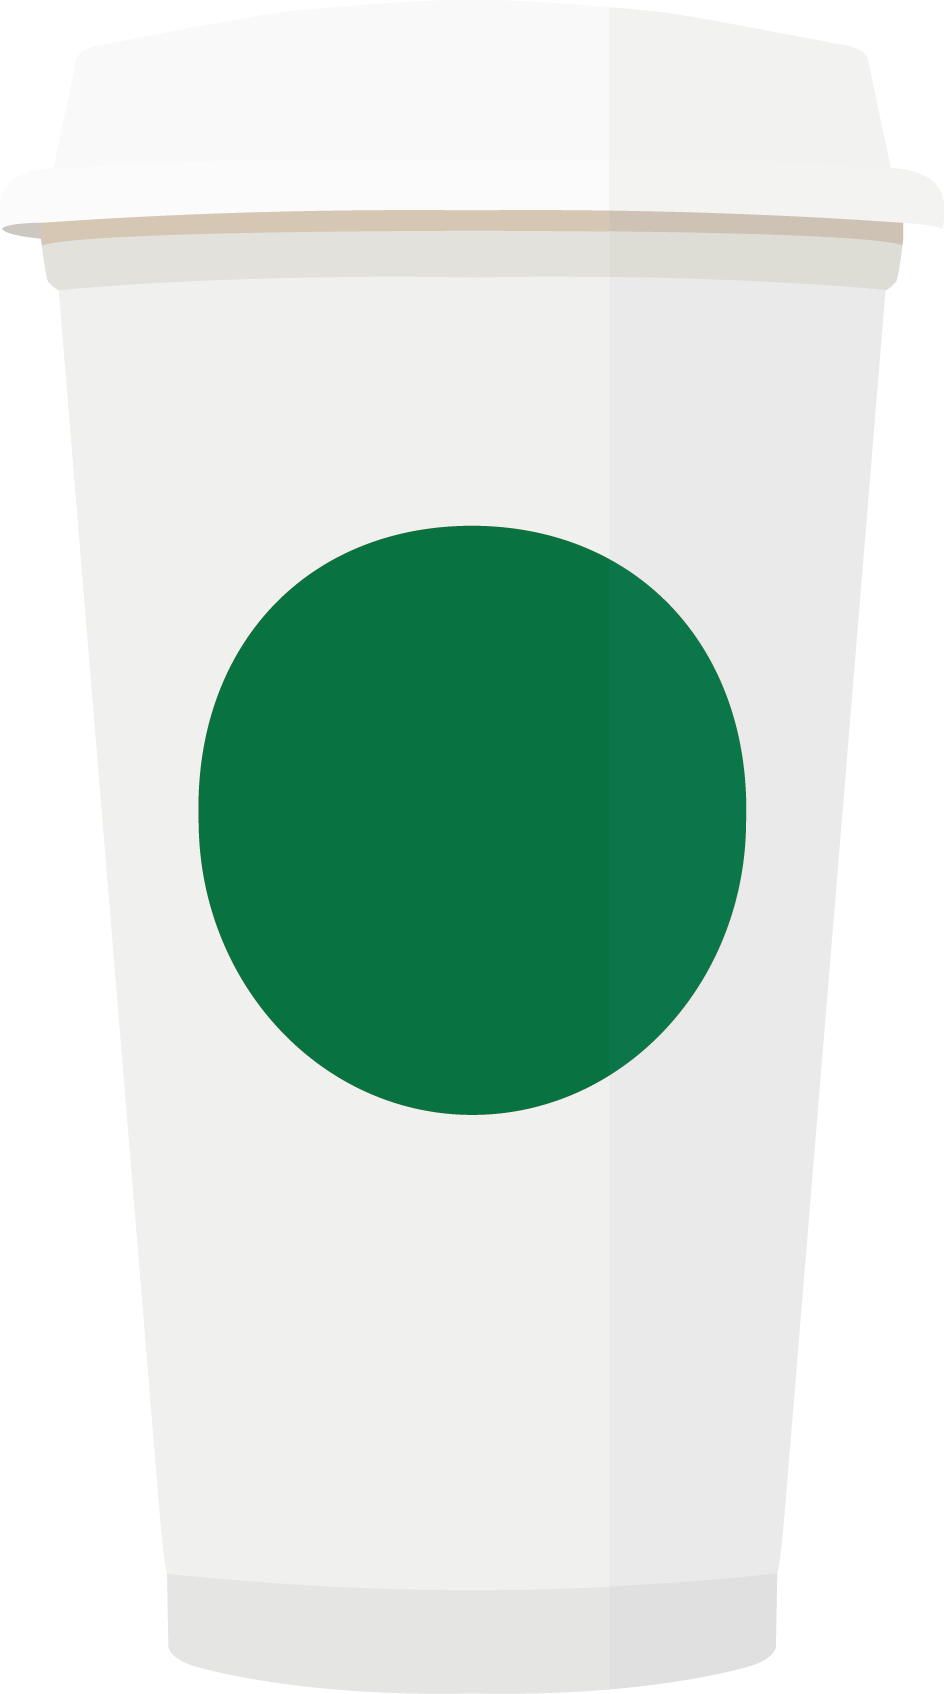 Takeaway Coffee Cups Vector Graphic / Flat Icon On - Plastic (944x1694)